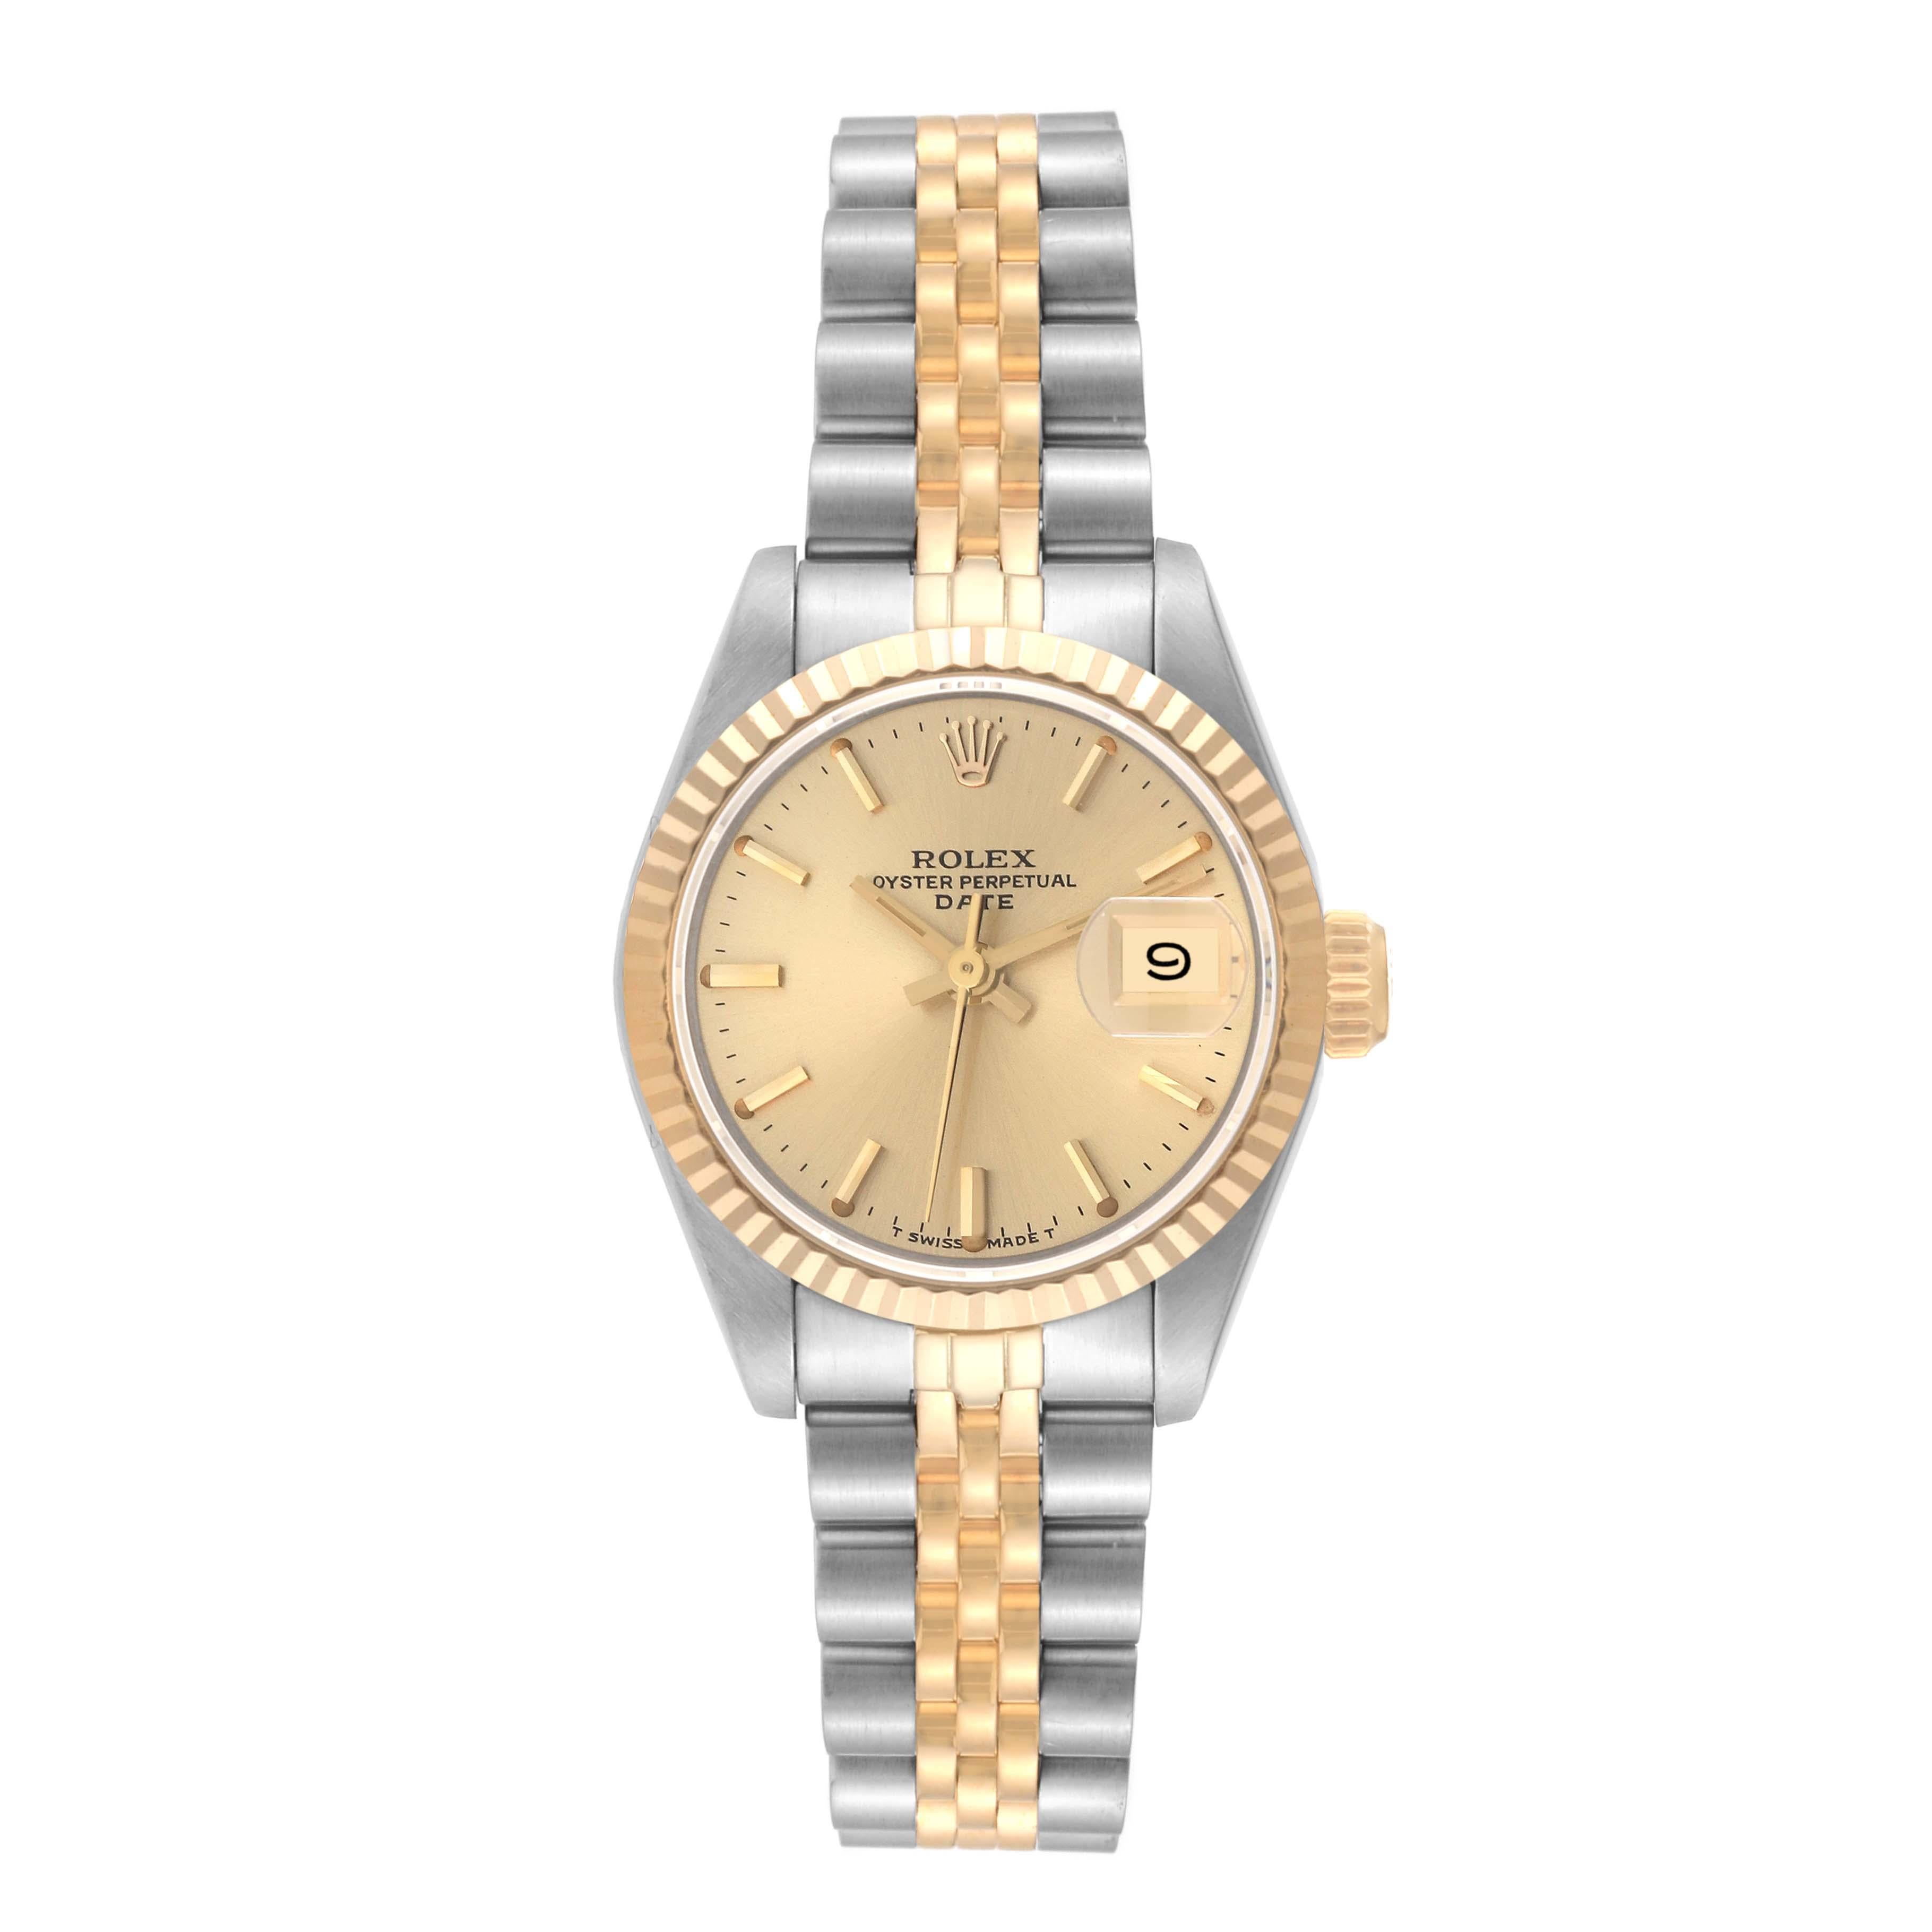 Rolex Datejust Champagne Dial Steel Yellow Gold Ladies Watch 69173 For Sale 1